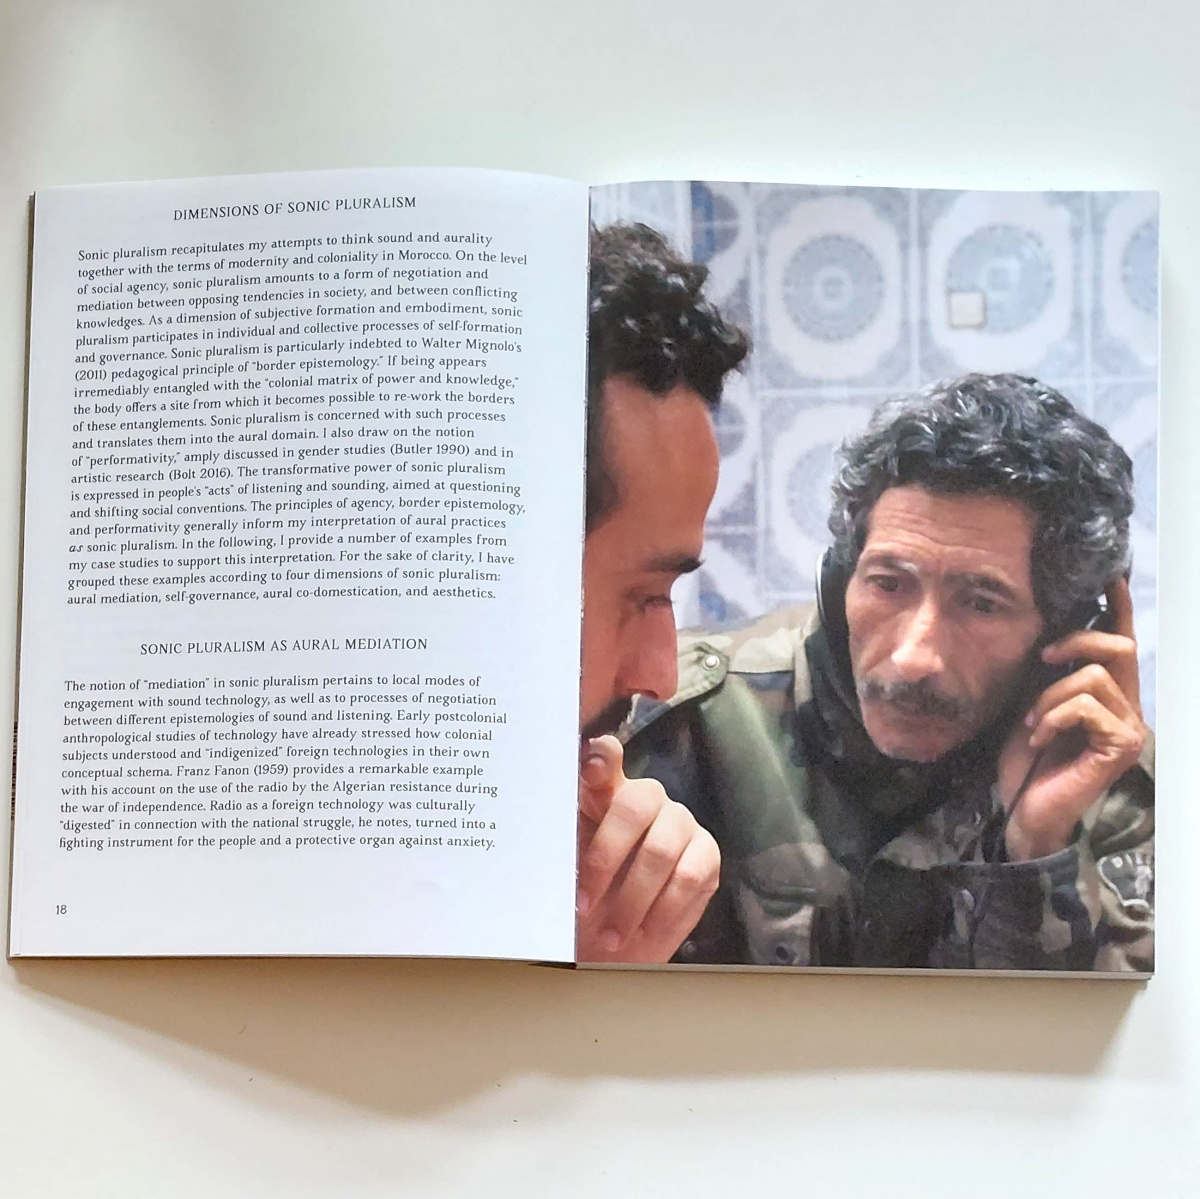 Excerpt from Gilles Aubry’s book «Sawt, Bodies, Species». Photo: listening session with Zouheir Atbane and Hassan Bechara in Goulmime, 2013 (photo: Gilles Aubry/adocs).